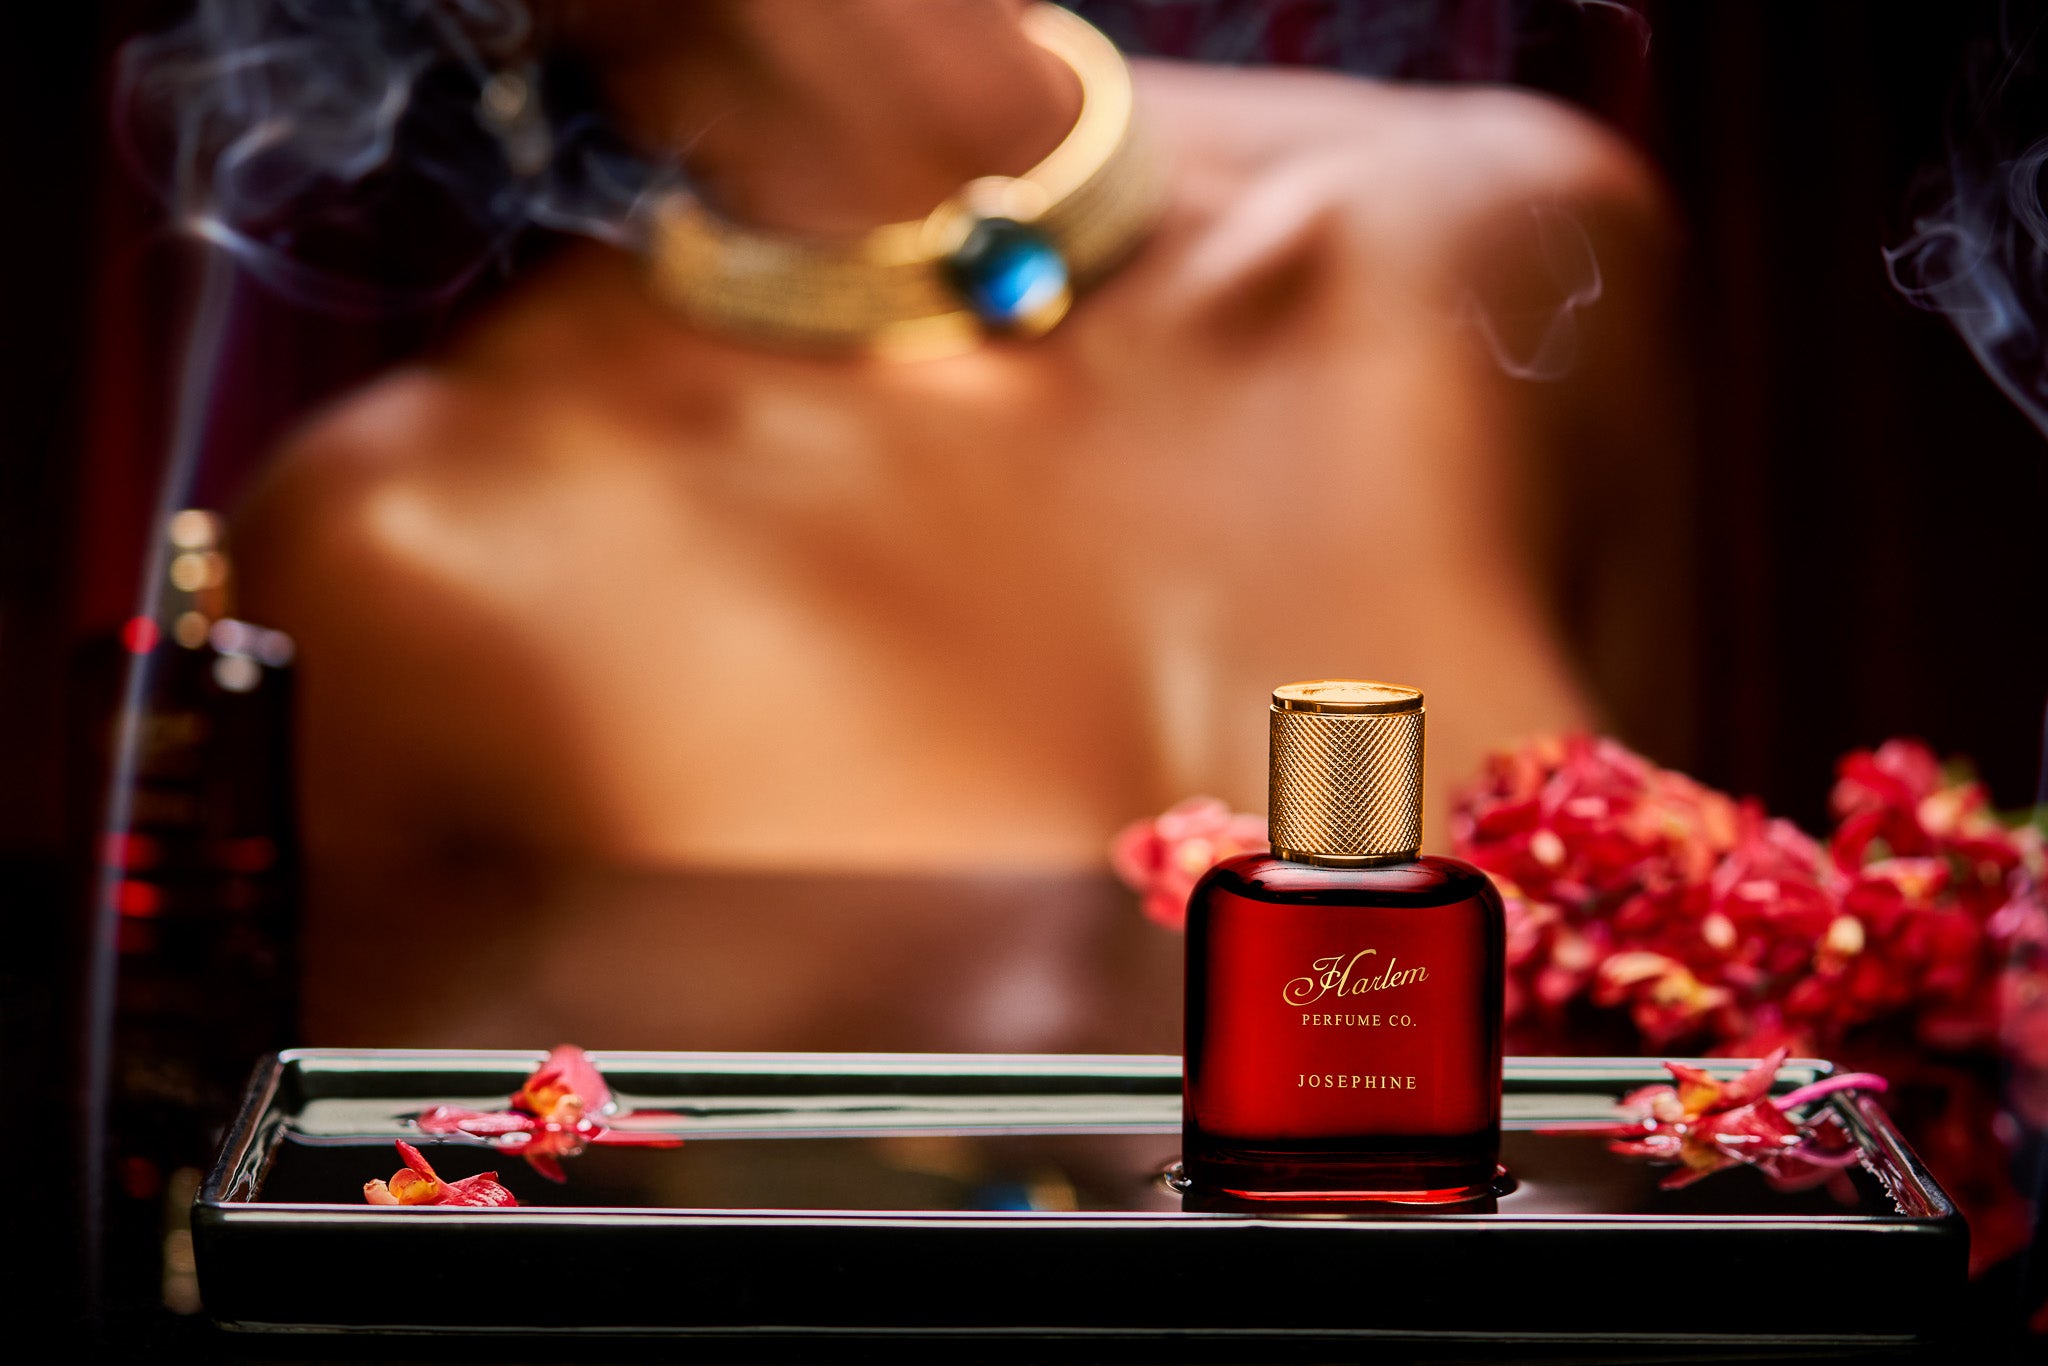 This is a lifestyle image of our red Josephine Perfume bottle with a woman in the background, wearing a gold necklace with incense blowing around her.